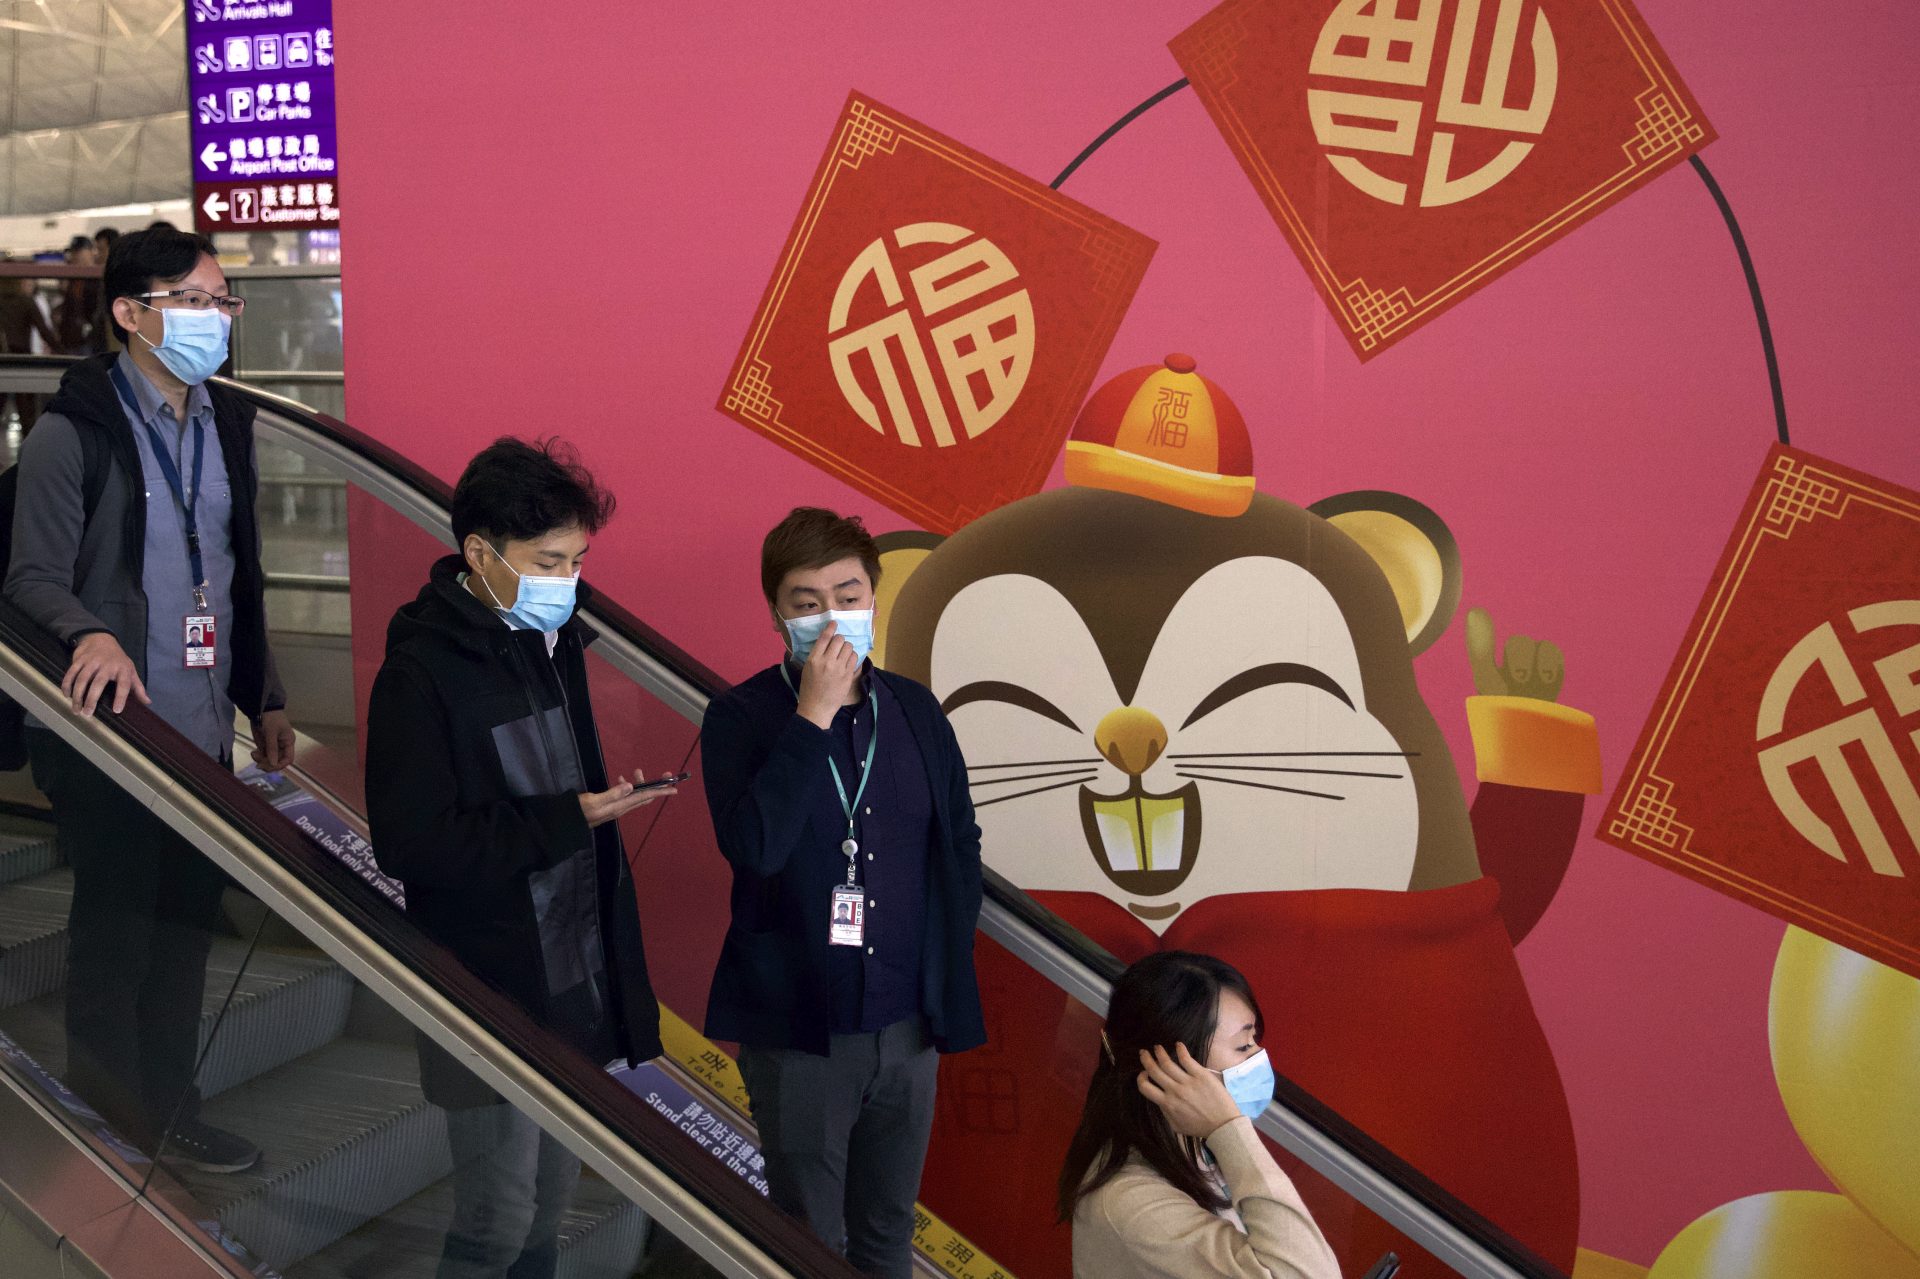 People wear face masks as they ride an escalator on Tuesday at the Hong Kong International Airport.